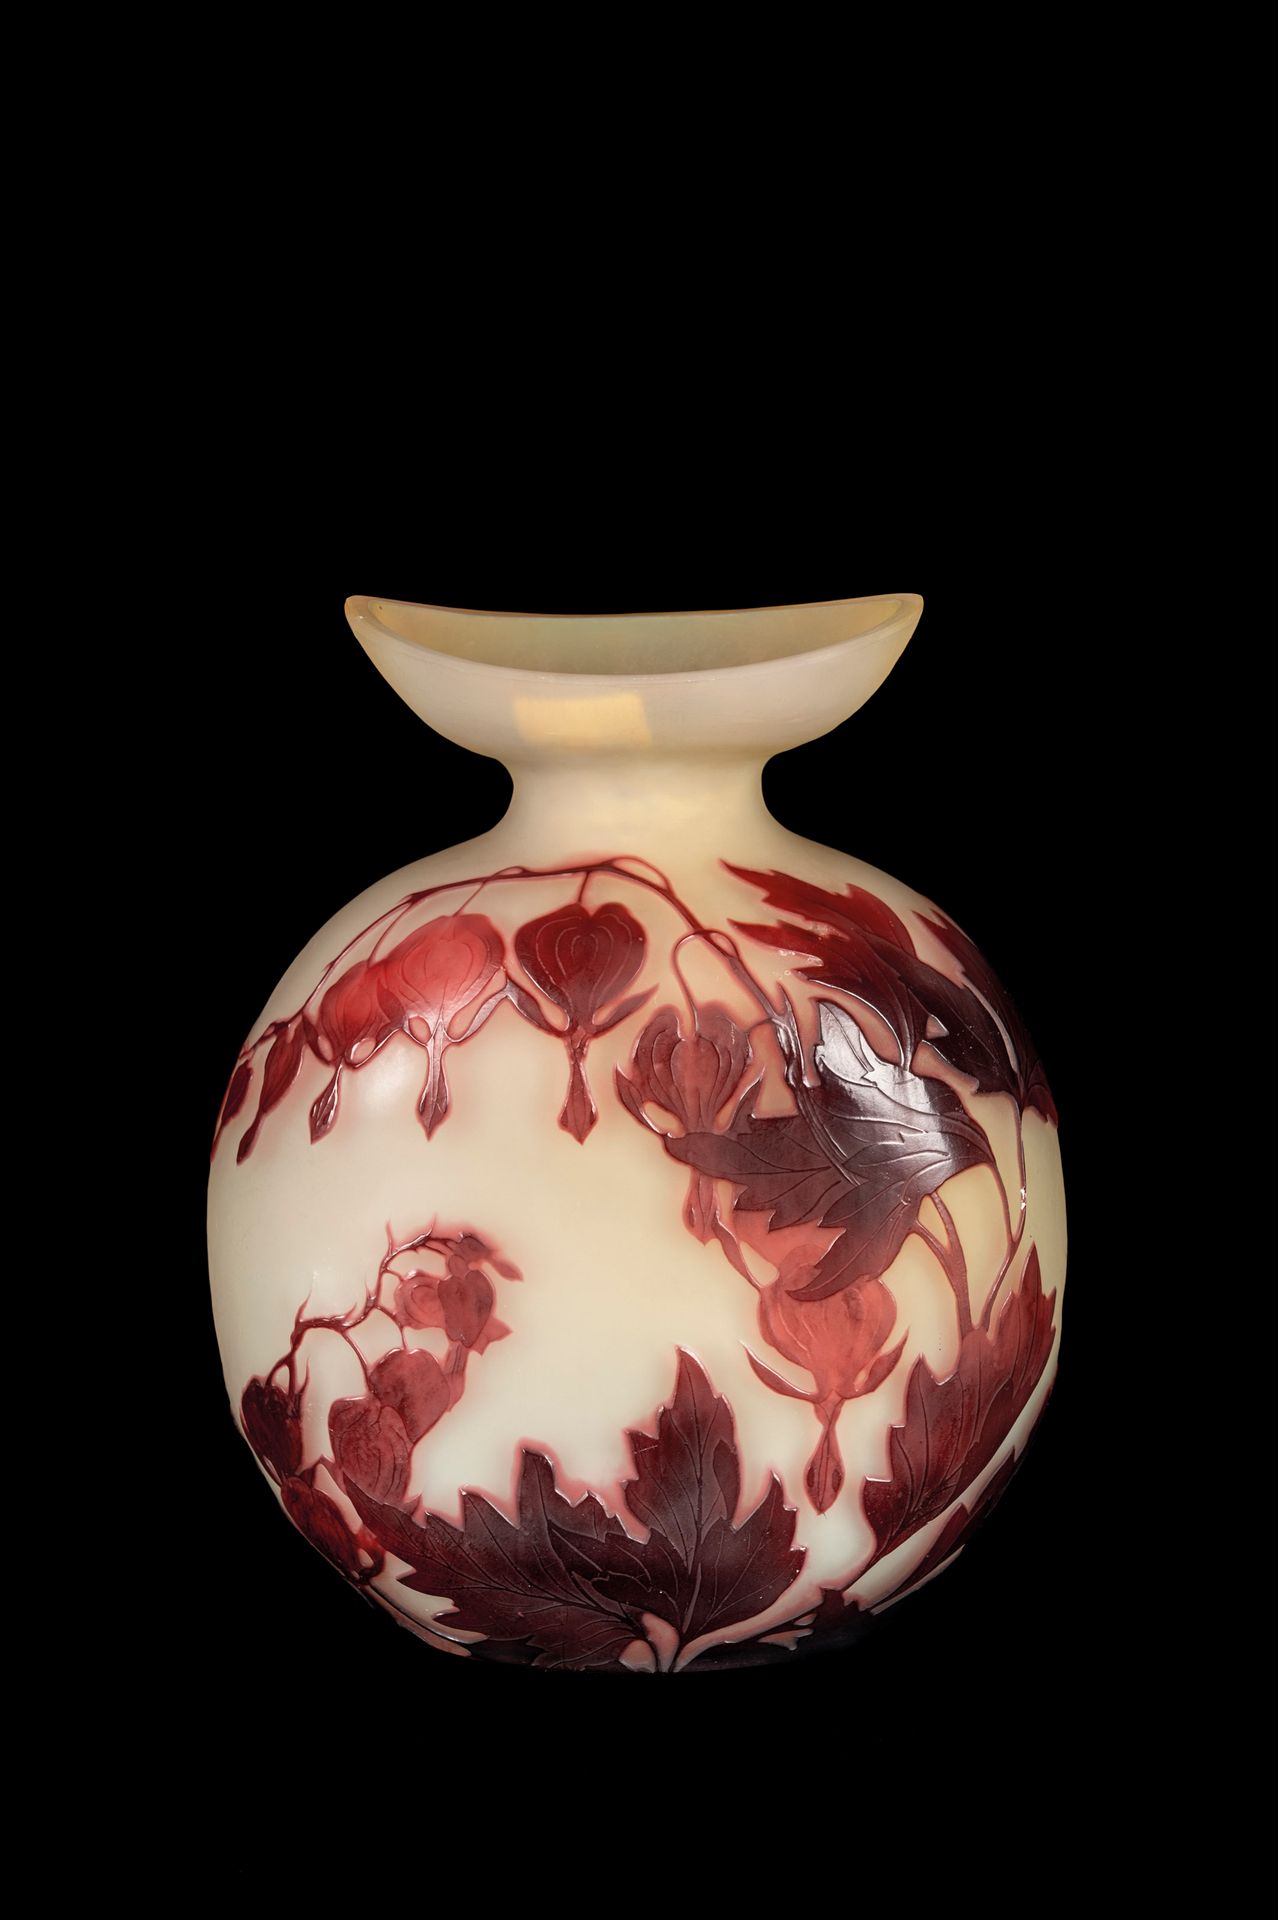 GALLÉ, ÉMILE (1846 - 1904) Carved and acid-etched cameo glass vase. Signed at th&hellip;